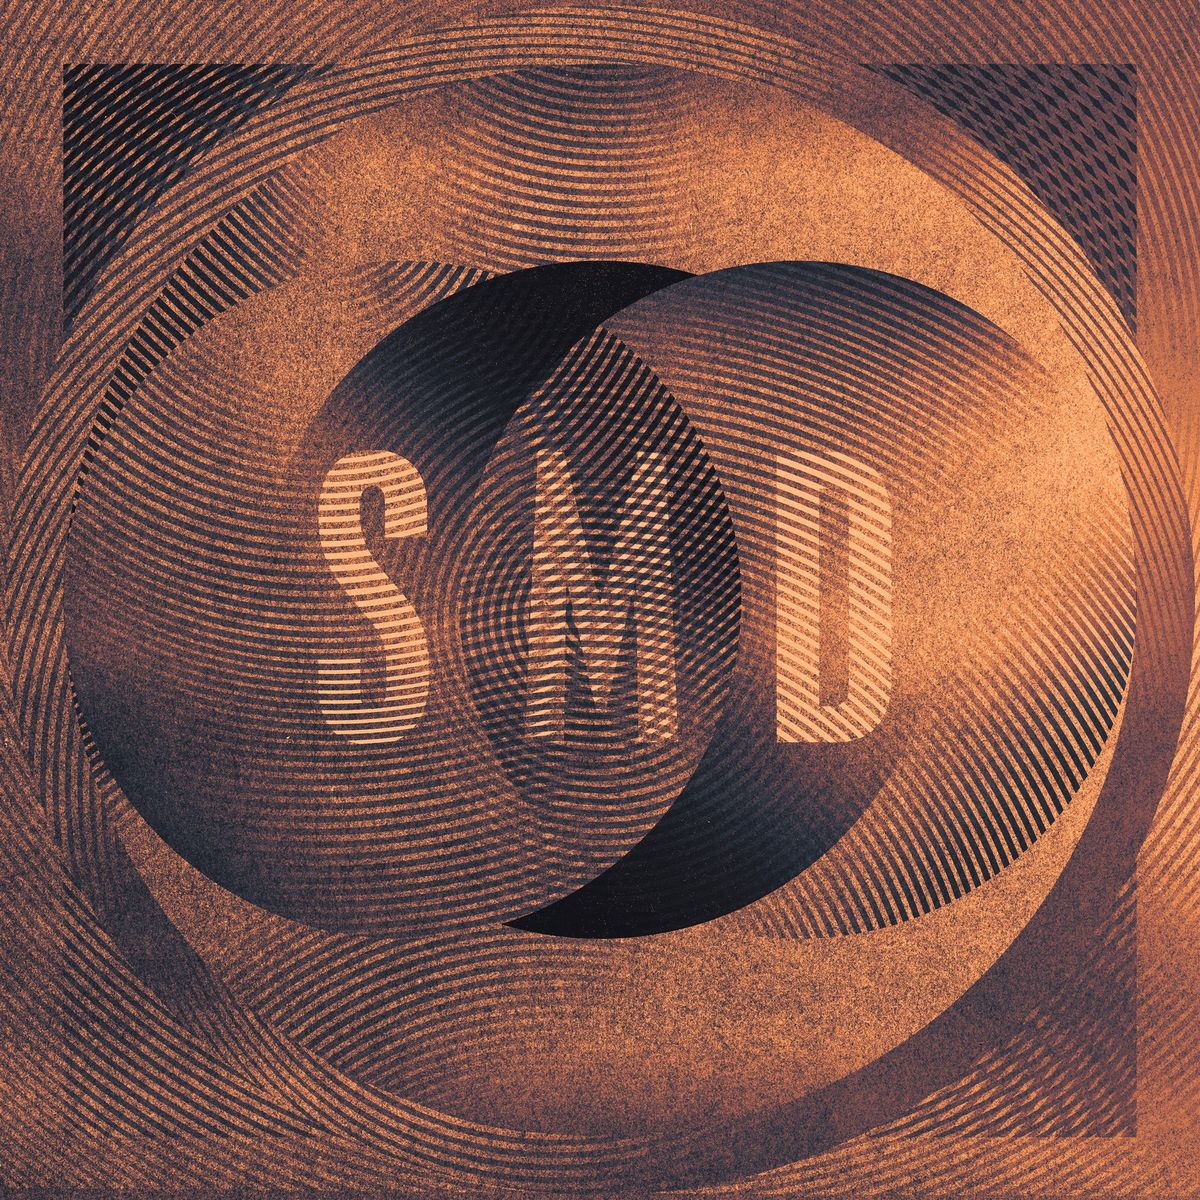 image cover: Simian Mobile Disco - Anthology: 10 Years of SMD / Wichita Recordings